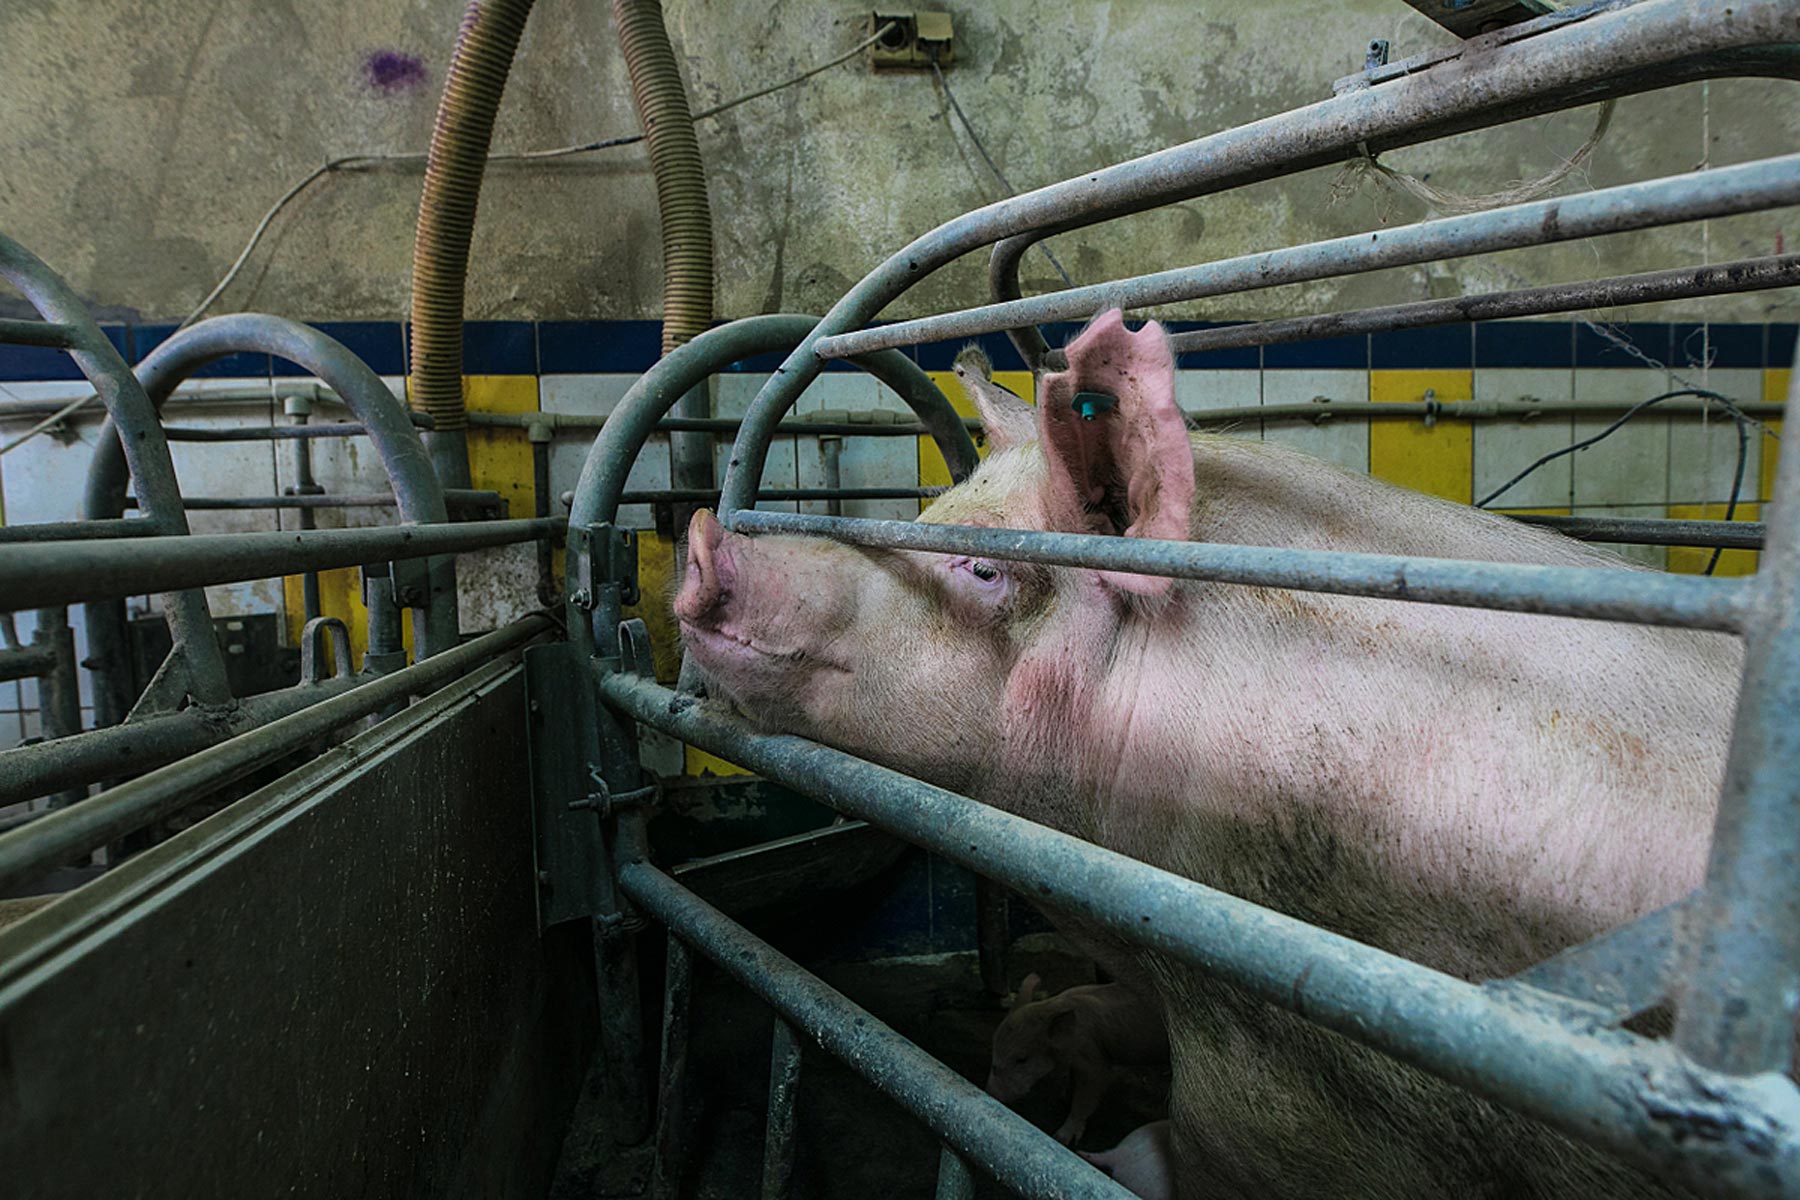 A sow looks out from the farrowing crate where she is confined with her young at a factory farm in Poland.